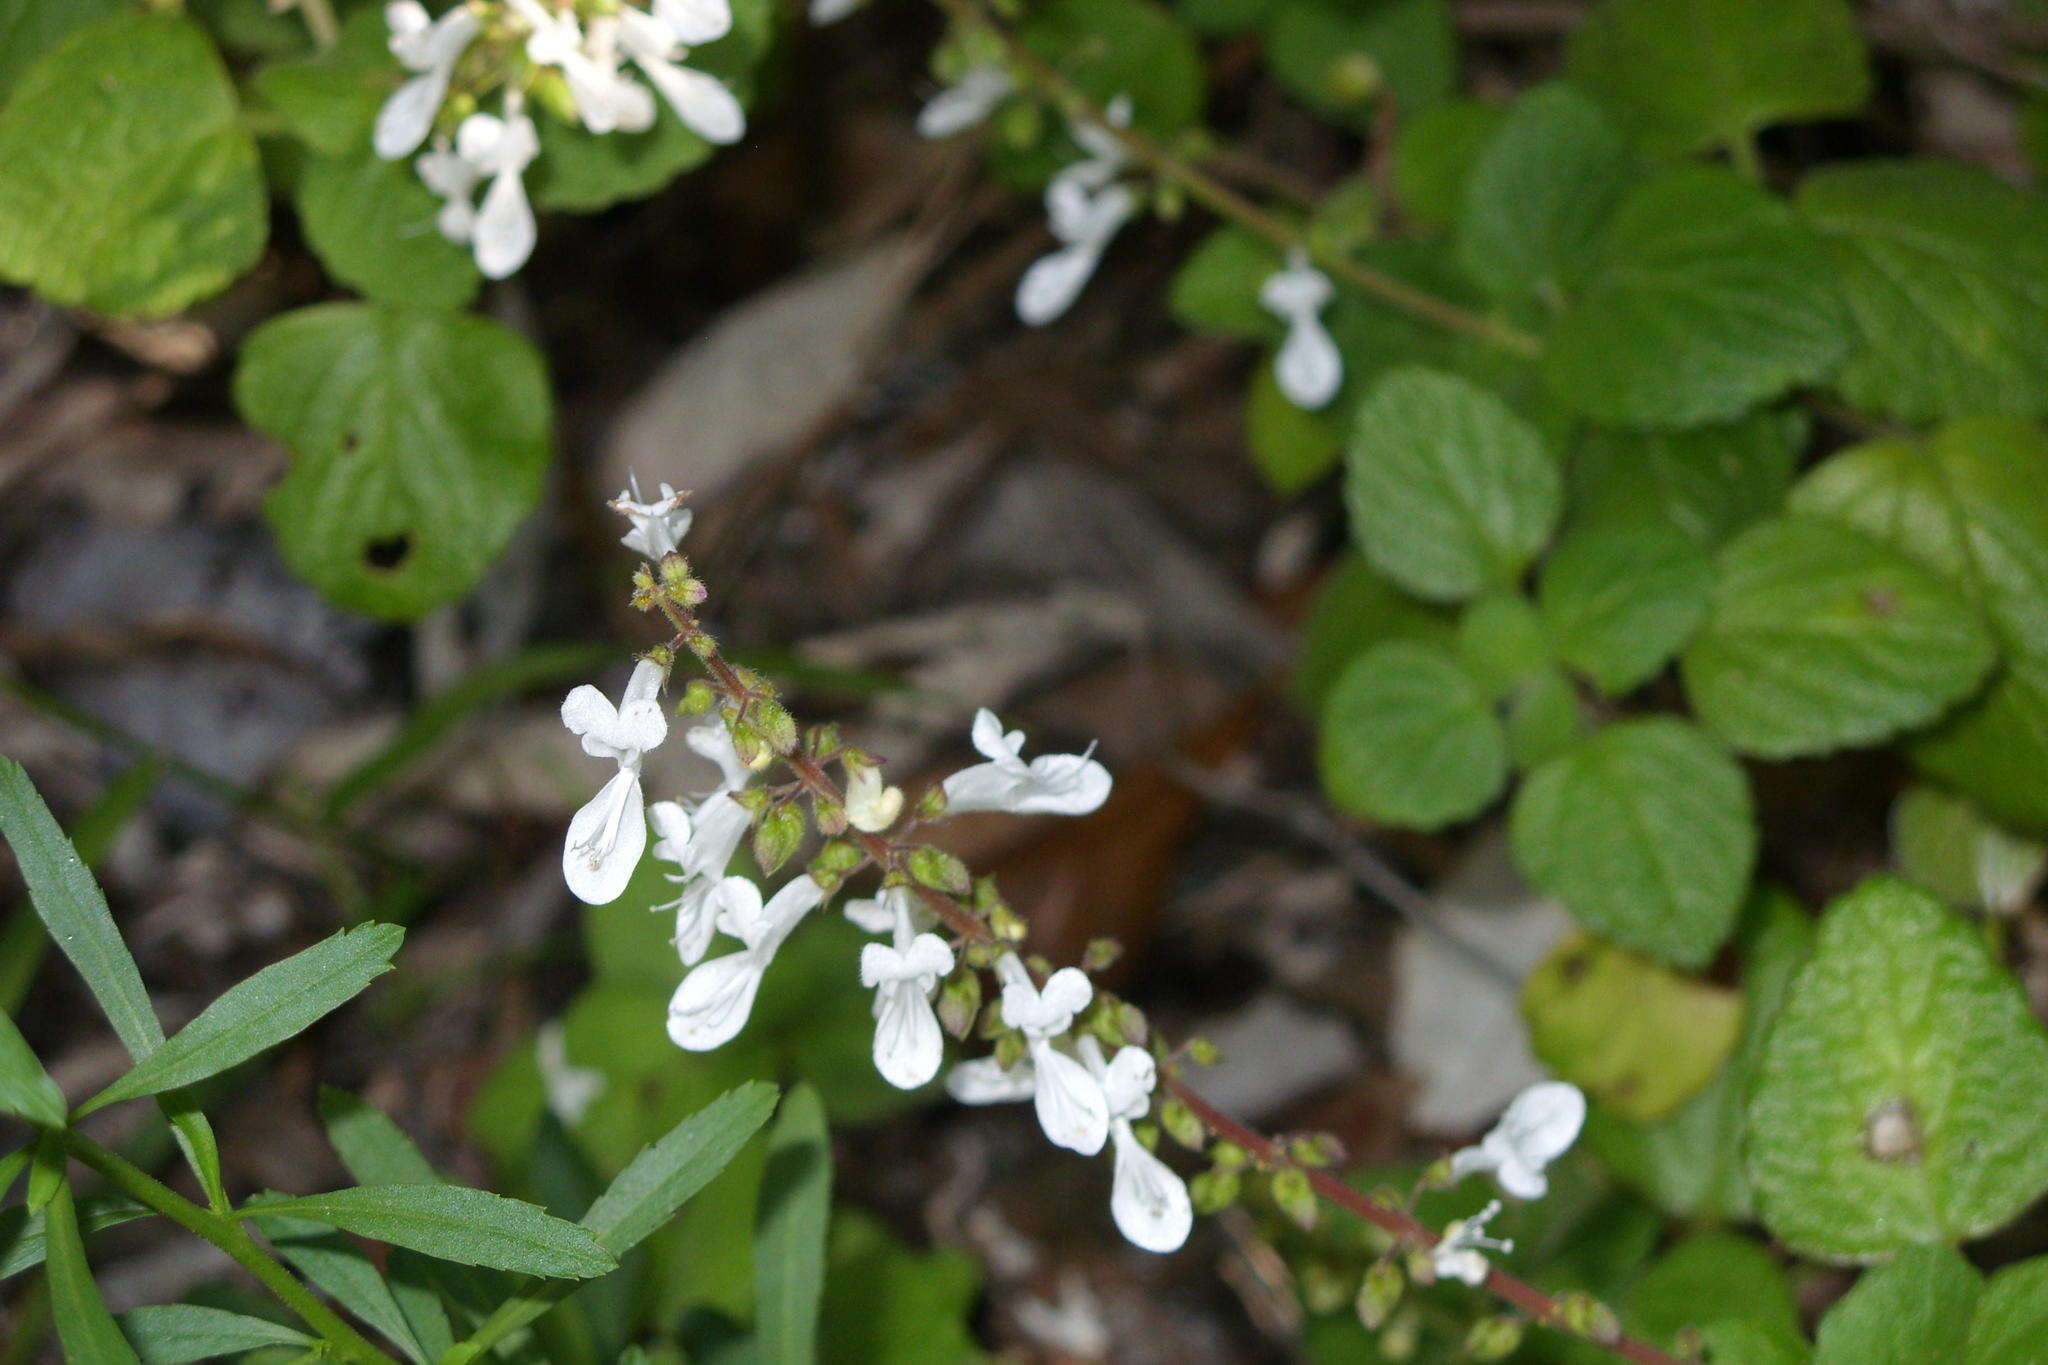 Image of Plectranthus madagascariensis (Pers.) Benth.